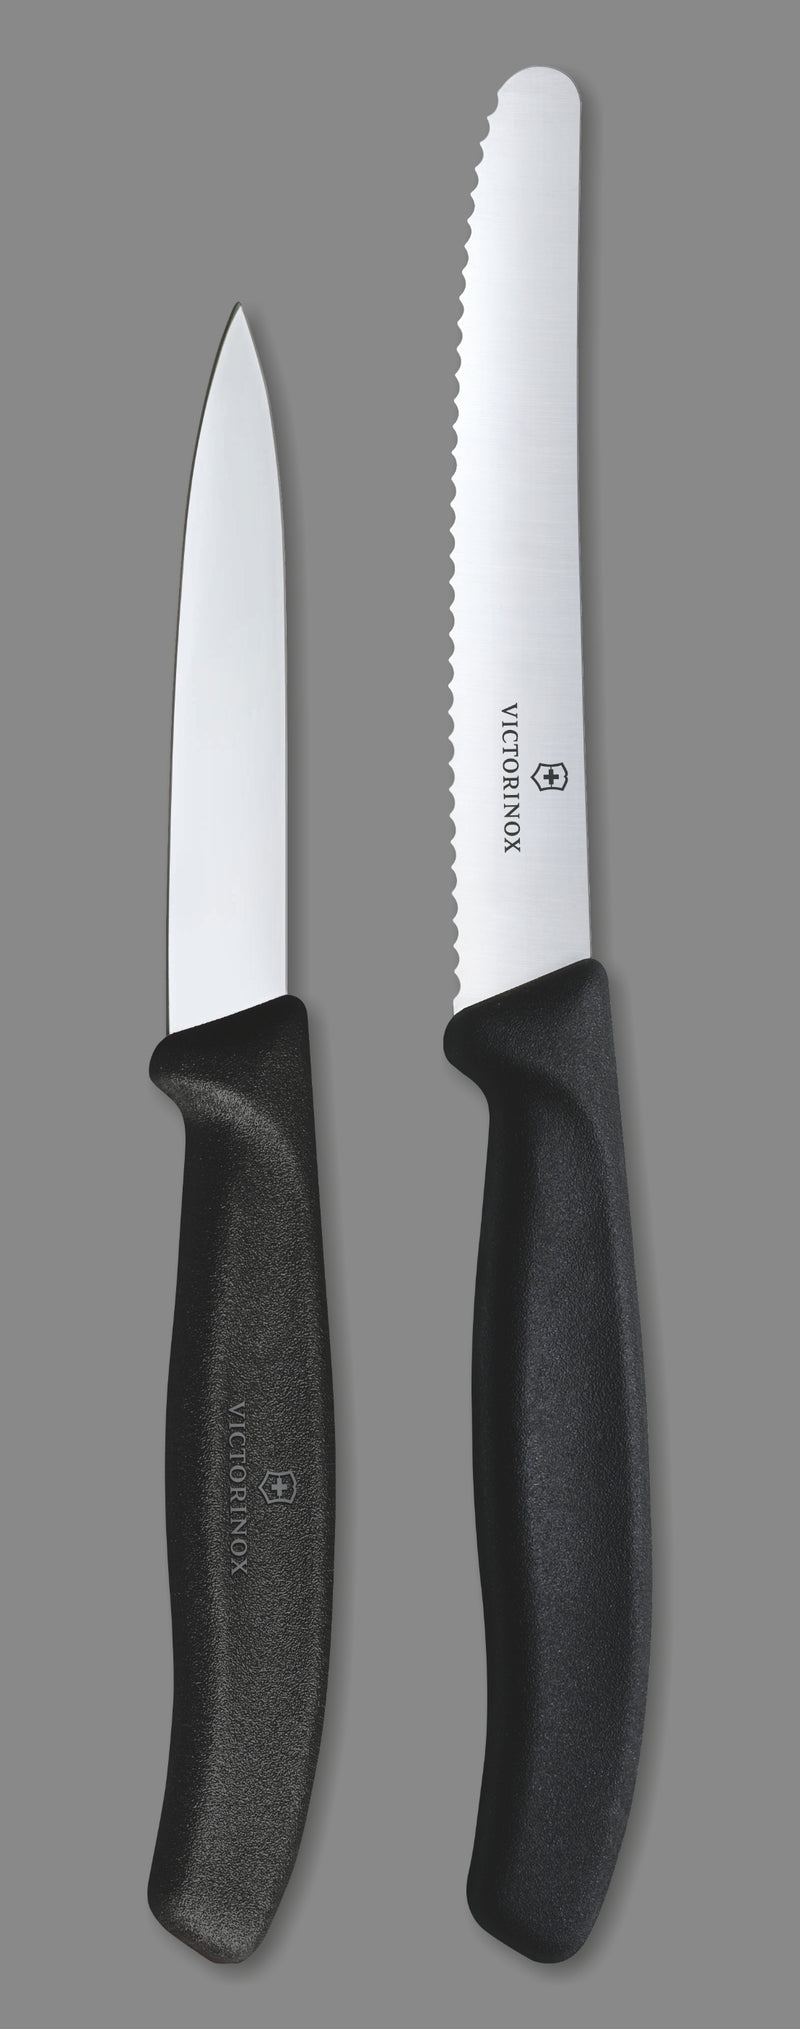 Internet's Best Premium Utility Knife | Box Cutter | Set of 2 | Retractable  blade | Rubber Handle | 2 Utility Knives included